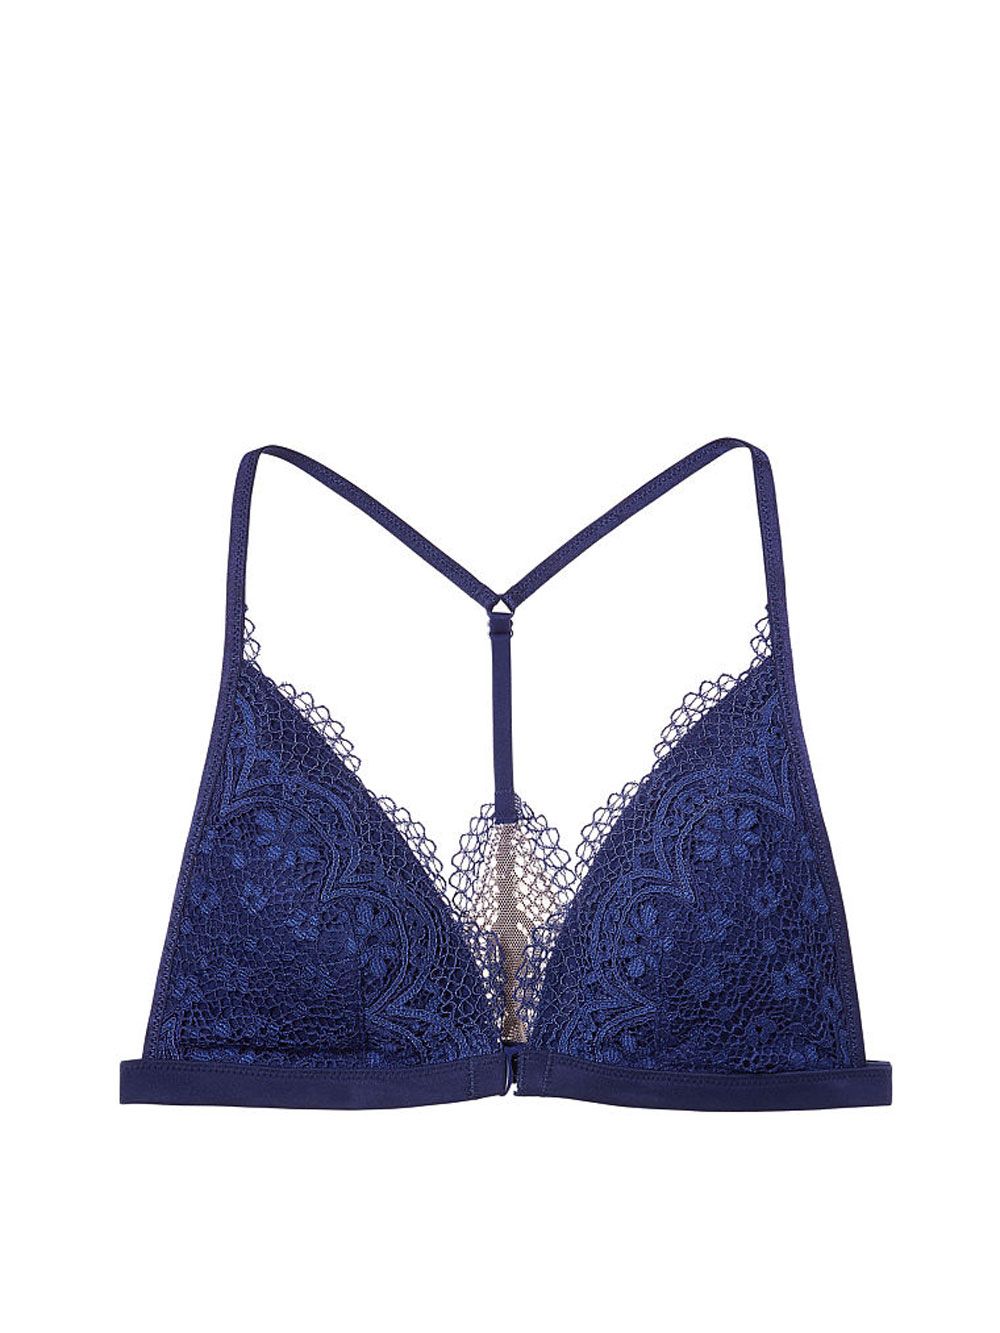 Victoria's Secret Body by Victoria Front Close Light Blue Lace Bralette -  Small - $23 - From Allison